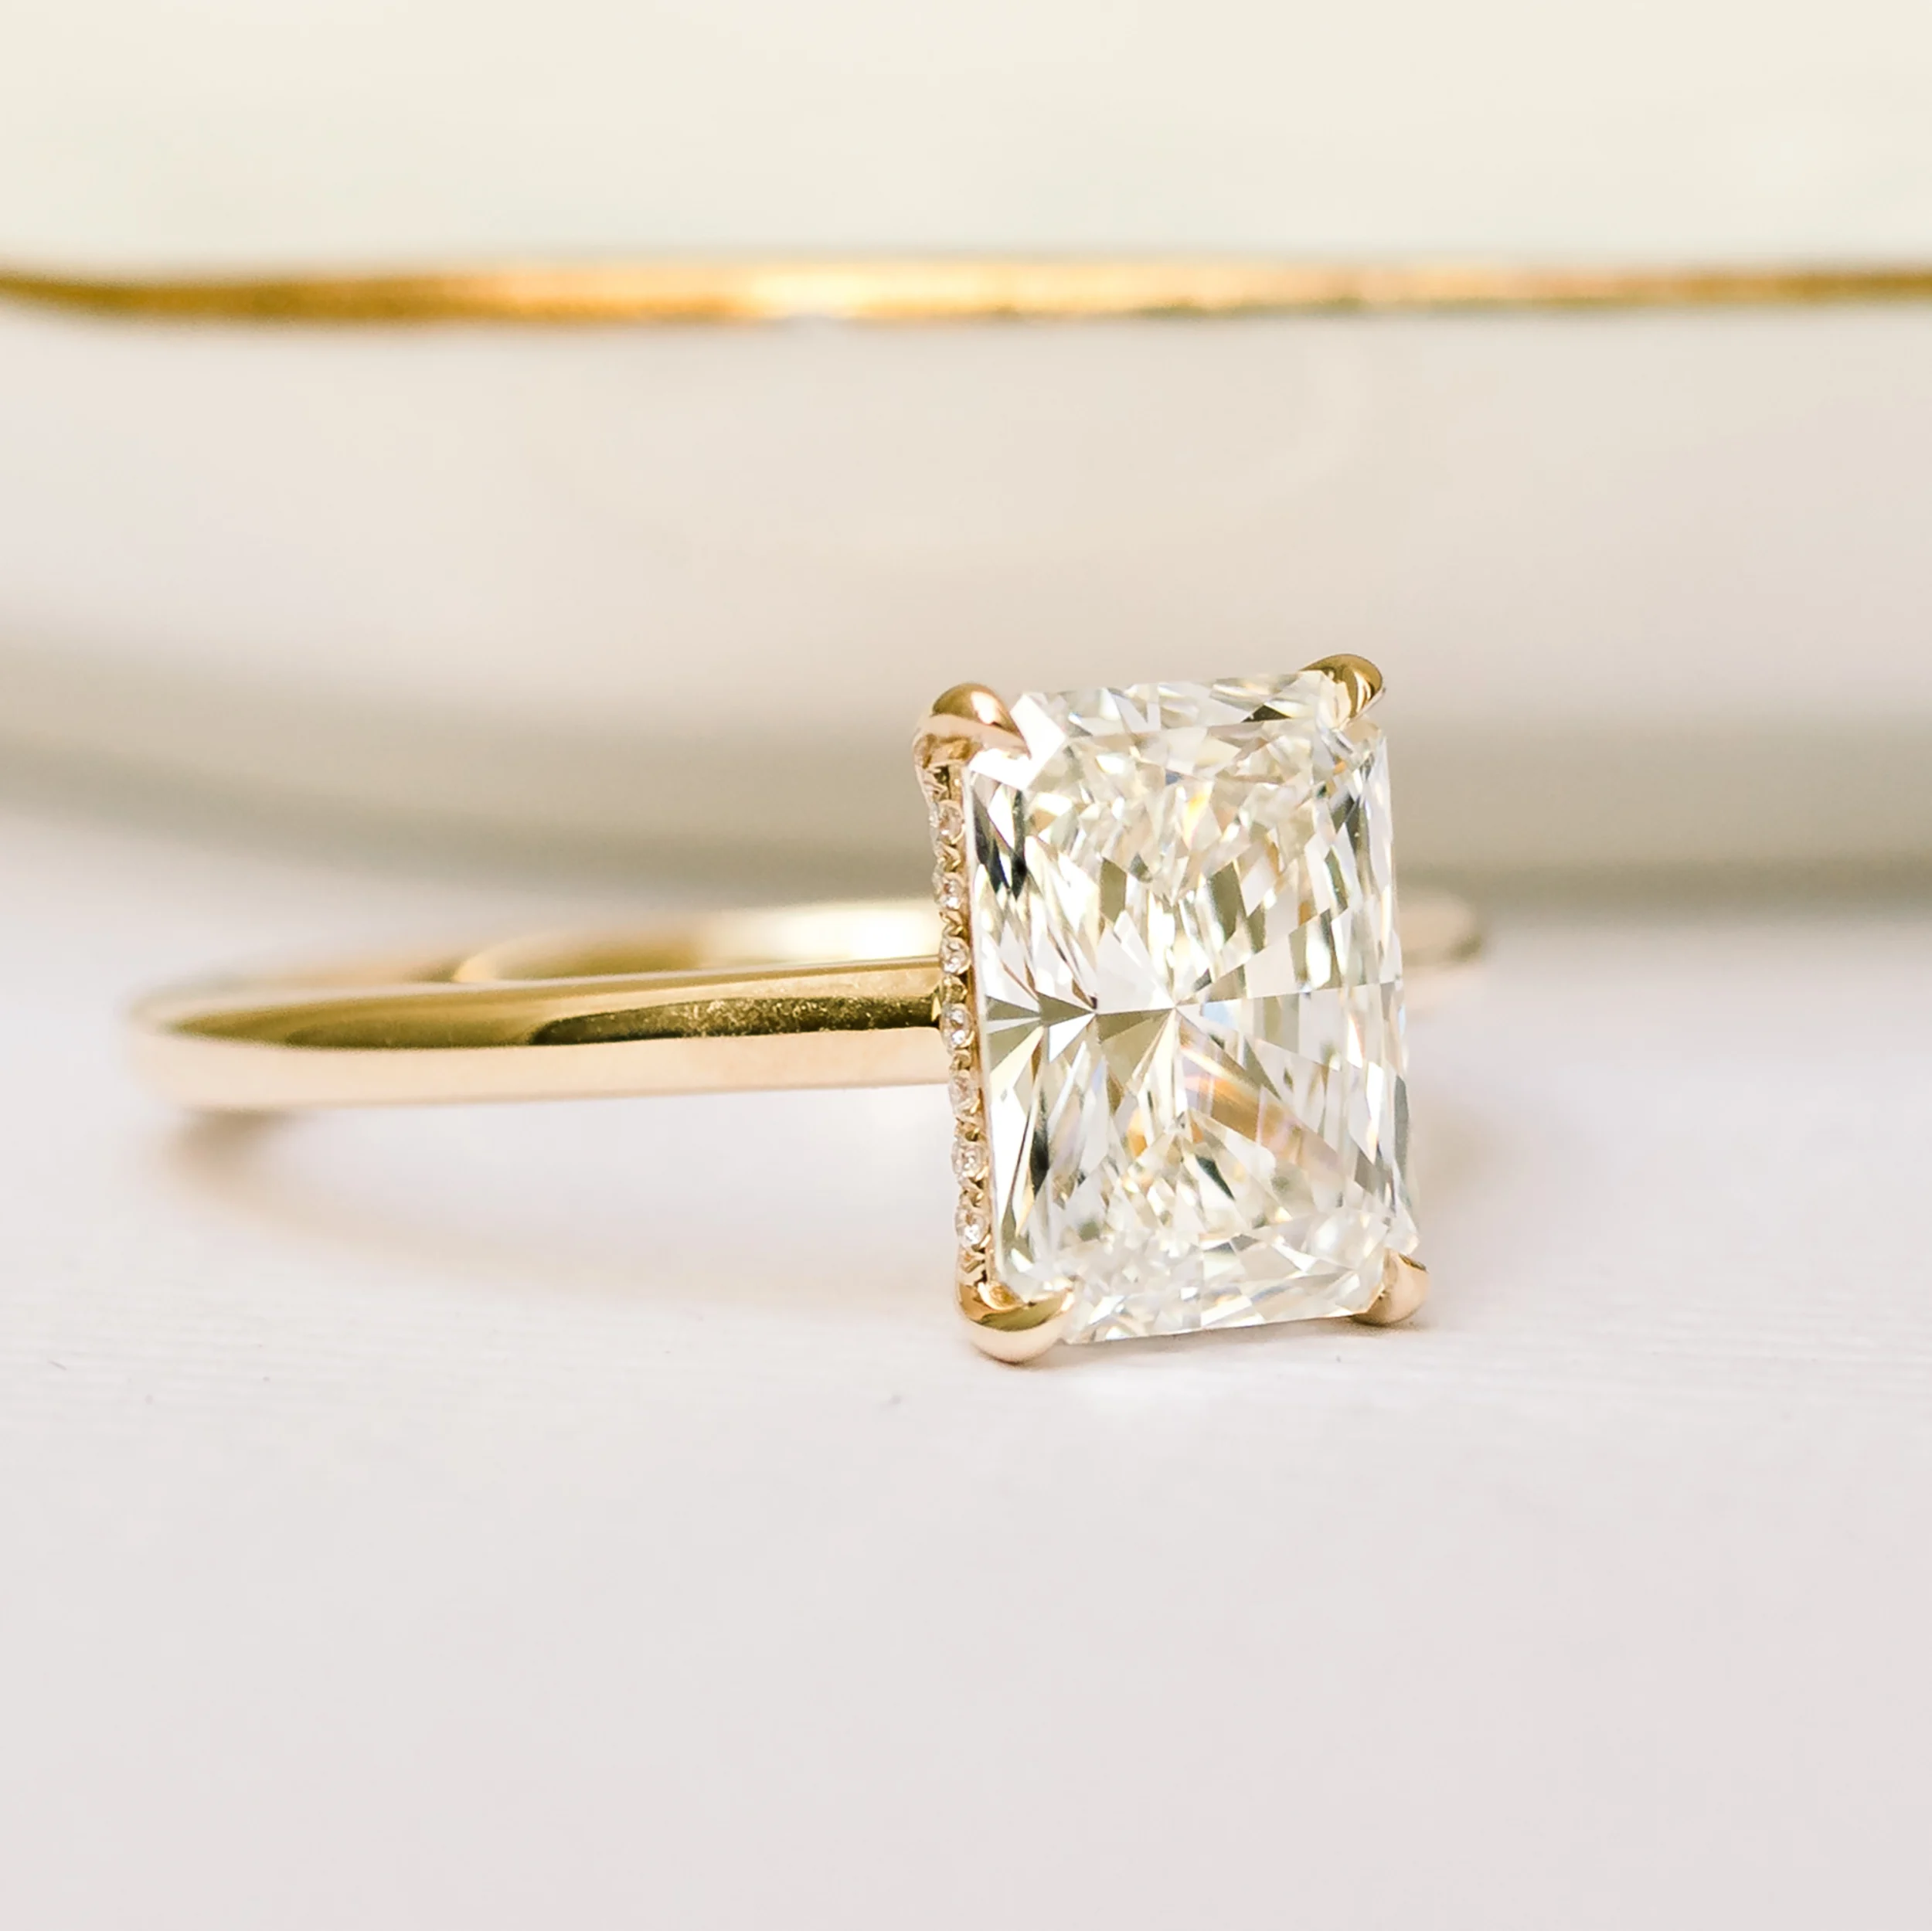 Radiant Cathedral Solitaire Diamond Engagement Ring featuring Lab Diamonds (Profile View)